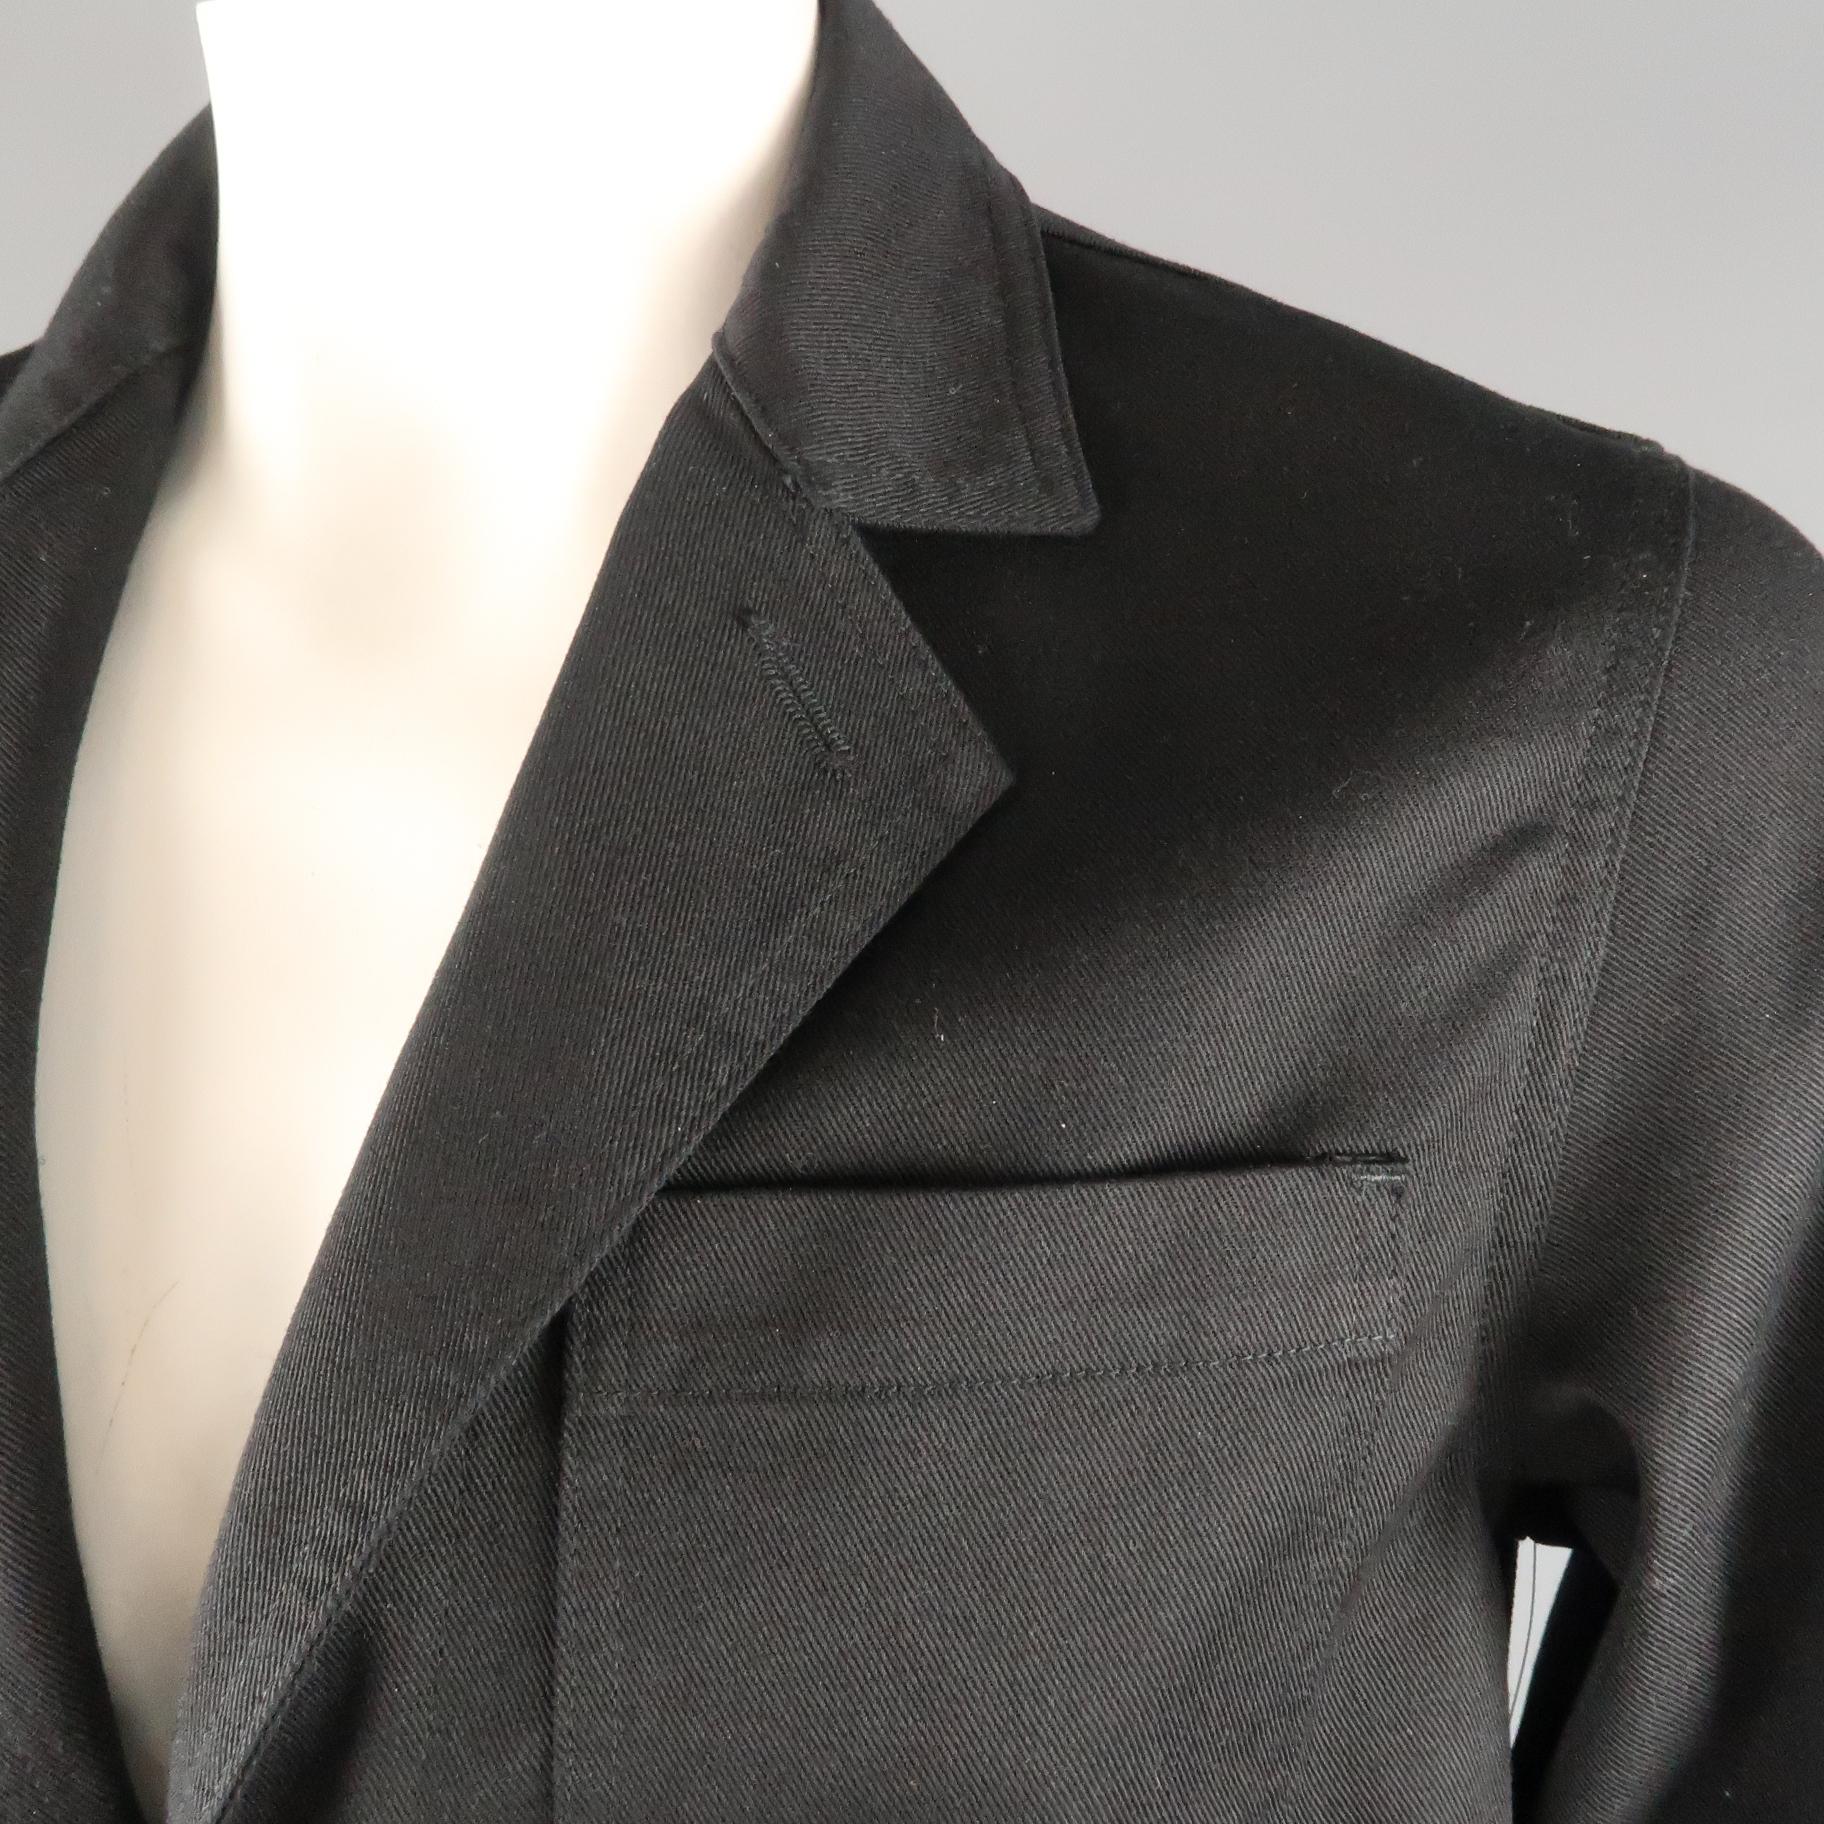 COMME des GARCONS GANRYU sport coat jacket comes in black twill with a notch lapel, two button single breasted front, and work wear style patch pockets. Made in Japan.
 
Excellent Pre-Owned Condition.
Marked: L
 
Measurements:
 
Shoulder: 18